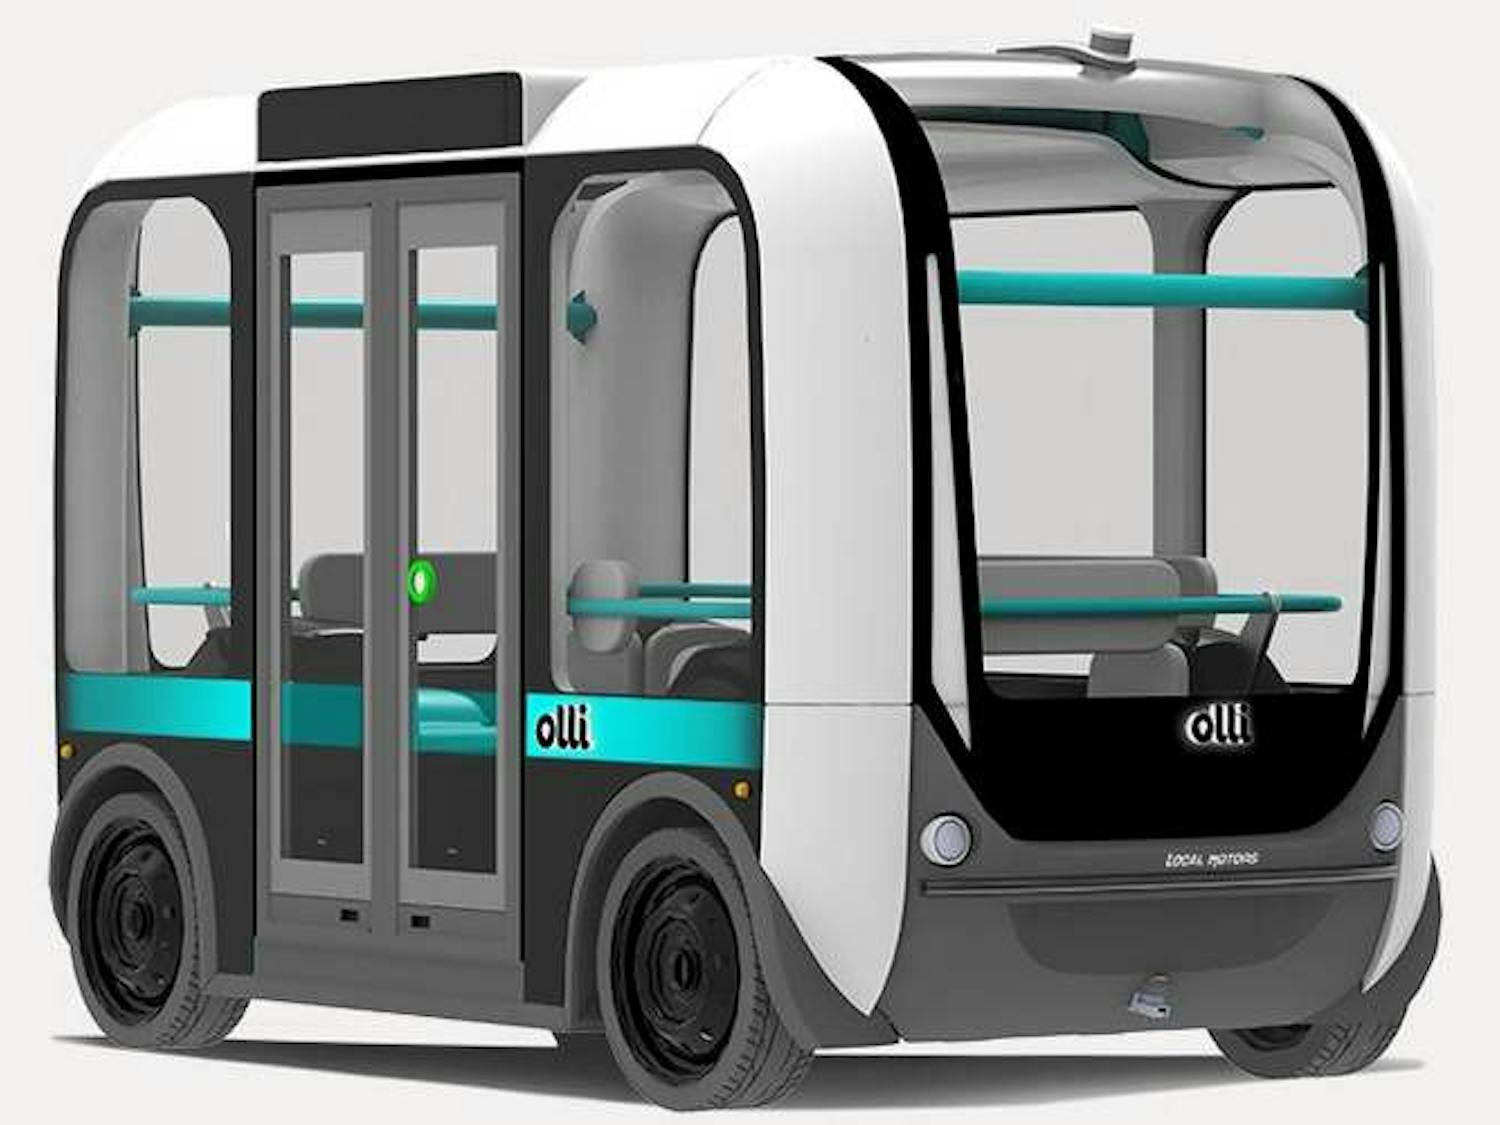 The School of Engineering is beginning to research a driverless bus on campus. The bus, which has already been tested in places like Germany and Denmark, runs on 360-degree sensors and can seat 12 passengers.